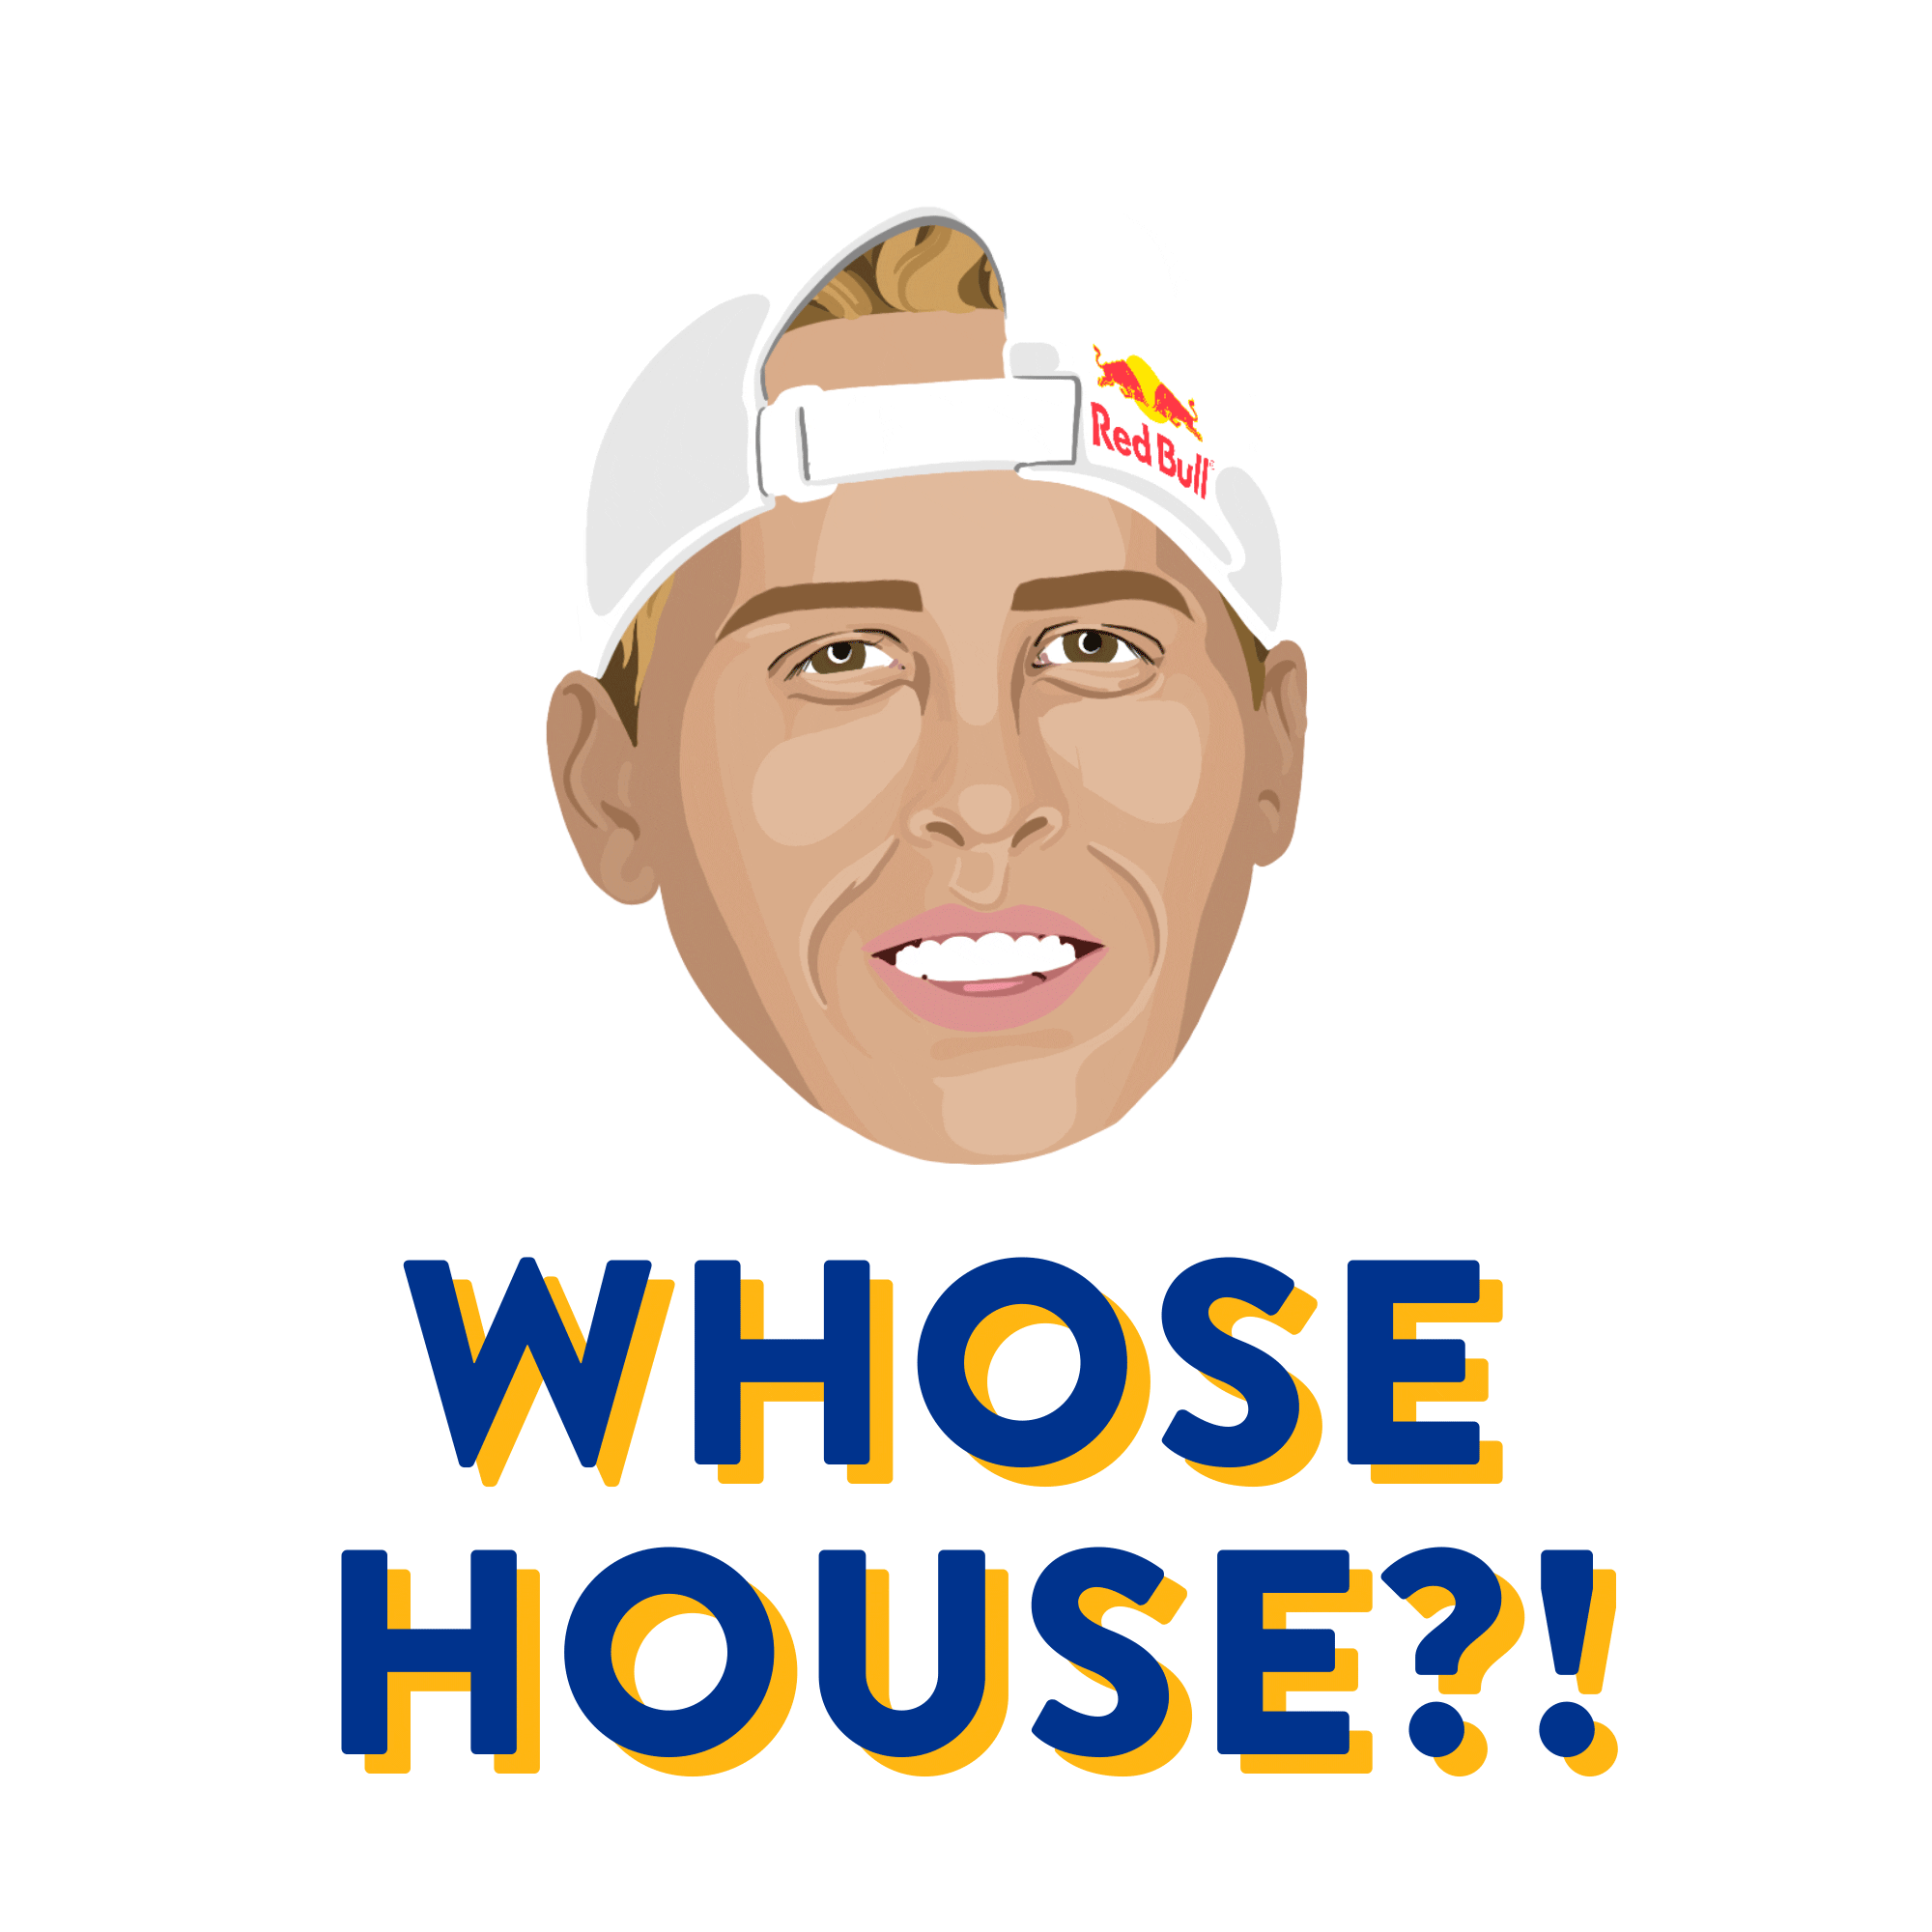 Super Bowl Reaction Sticker by Red Bull